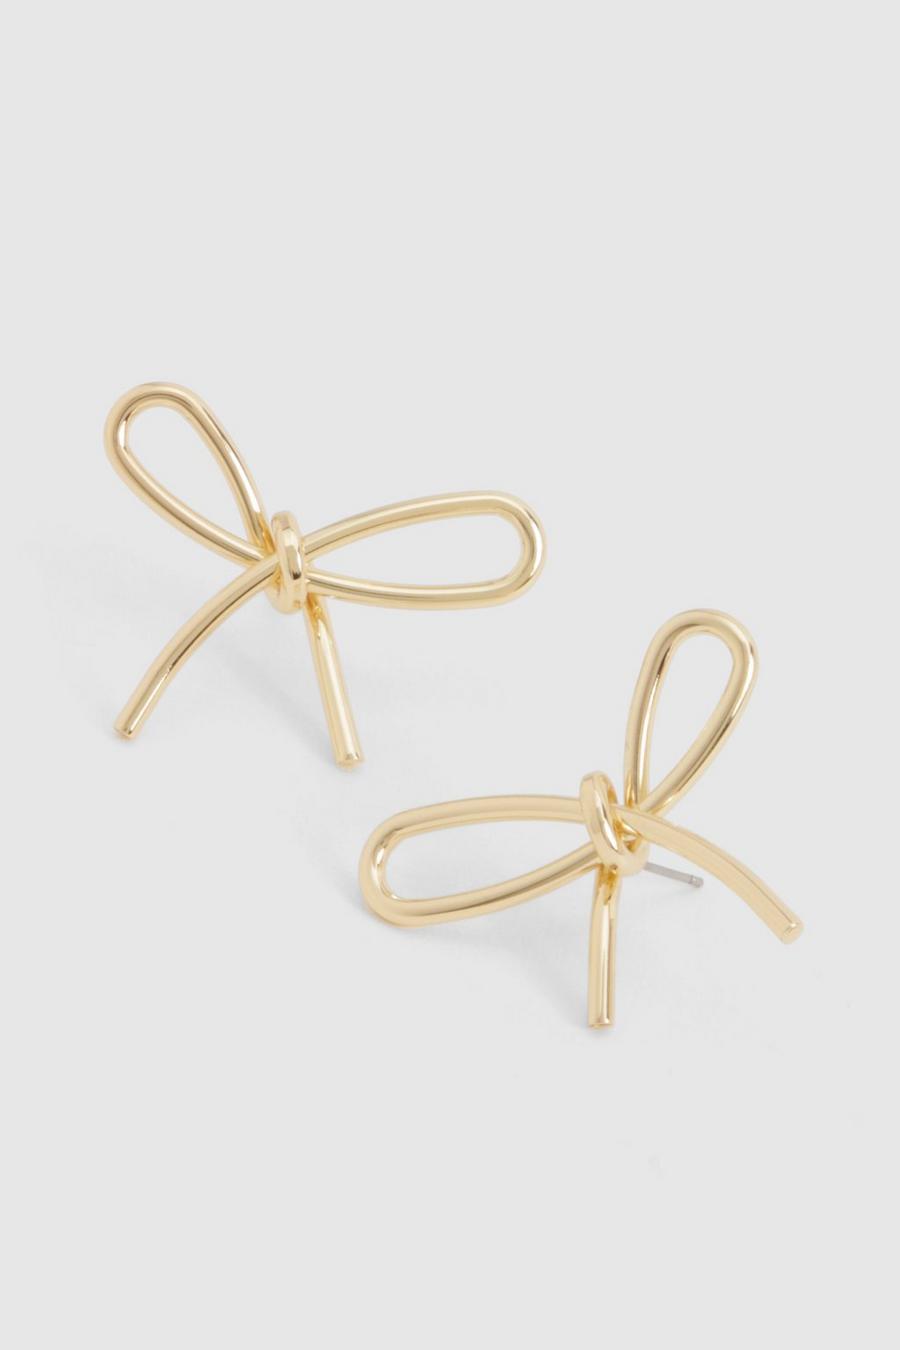 Gold Statement Knot Bow Earrings 